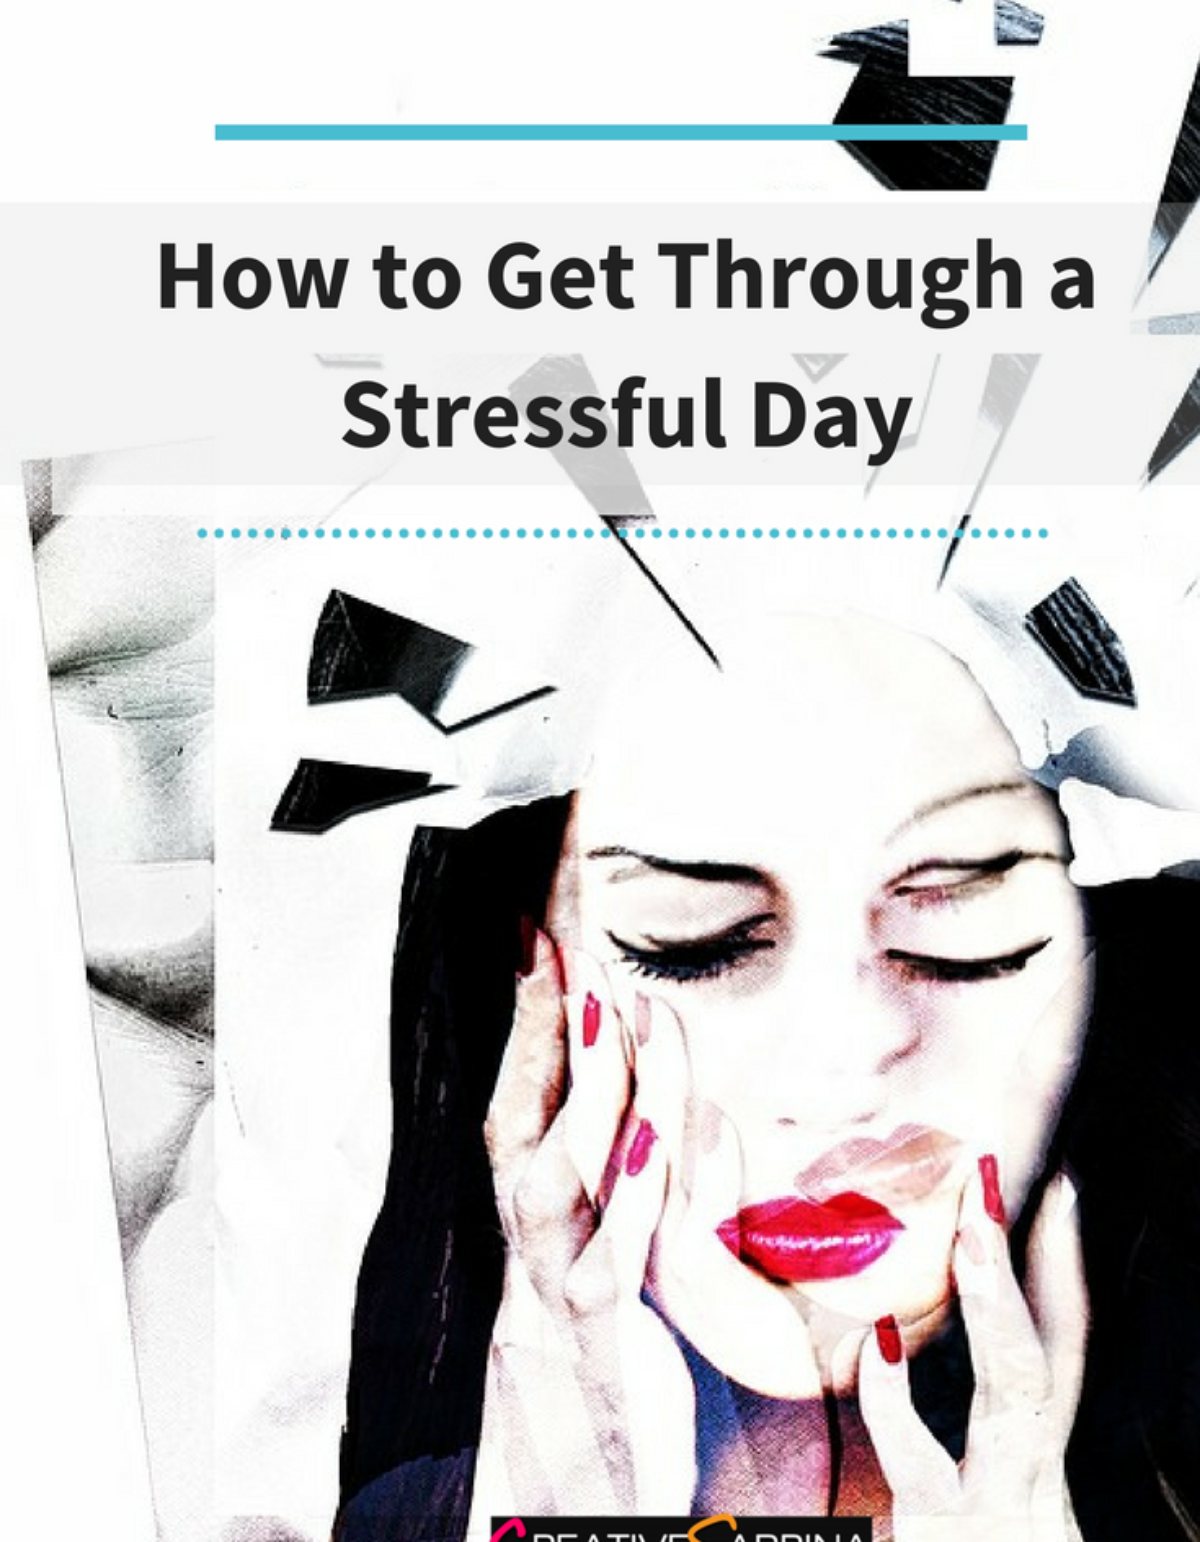 How to Get Through a Stressful Day